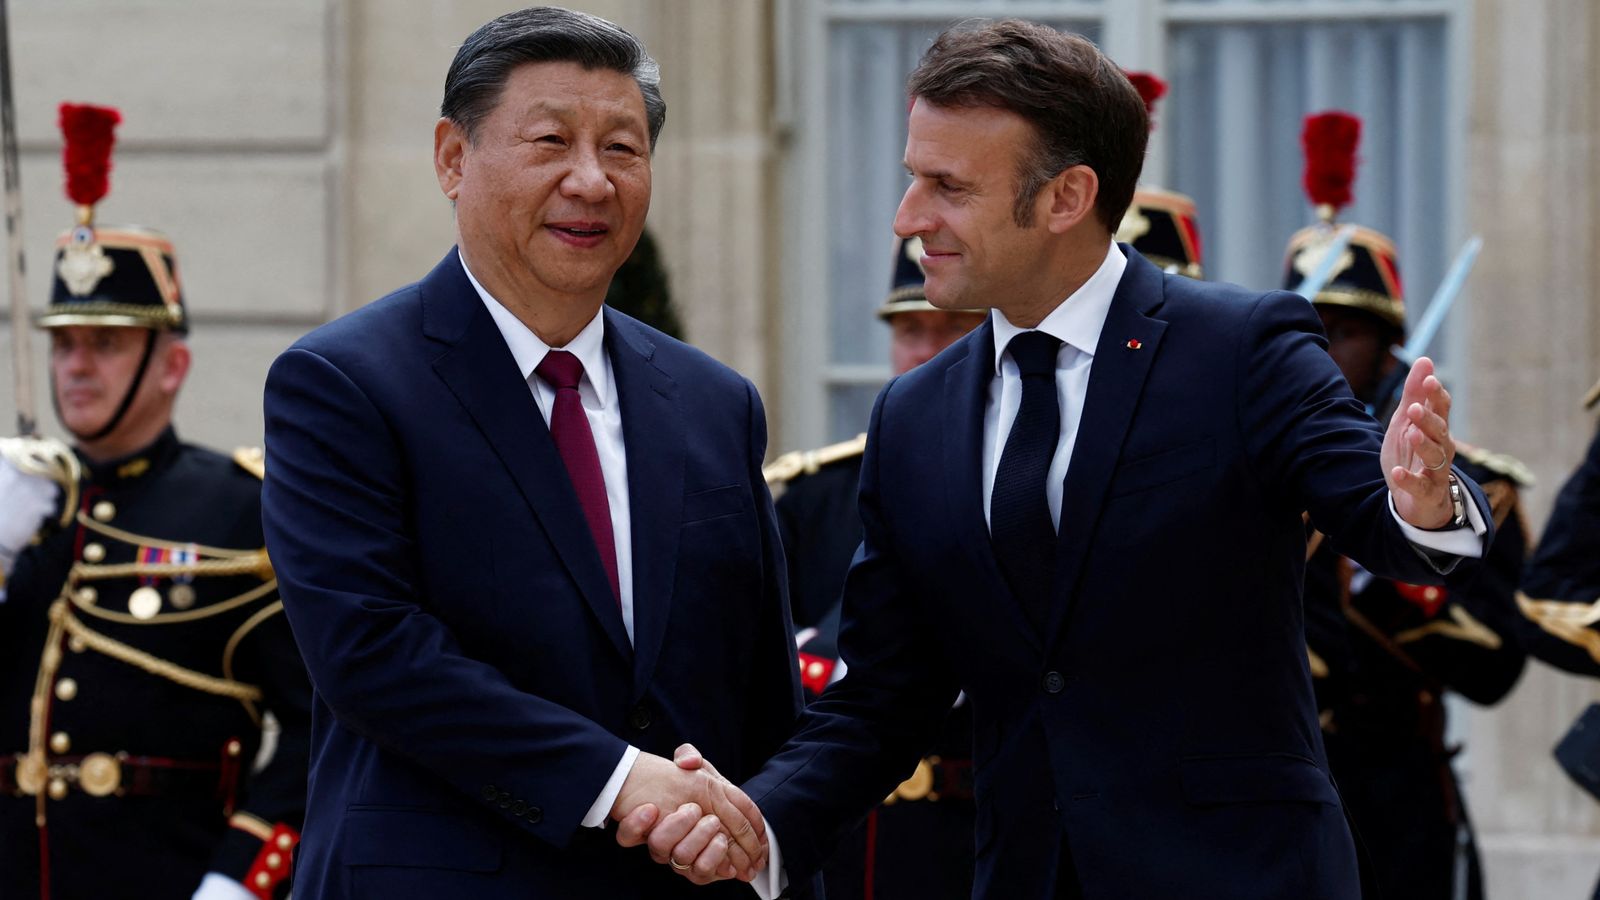 Difficult negotiations loom as China's Xi Jinping lands in Paris for Europe trip |  World News